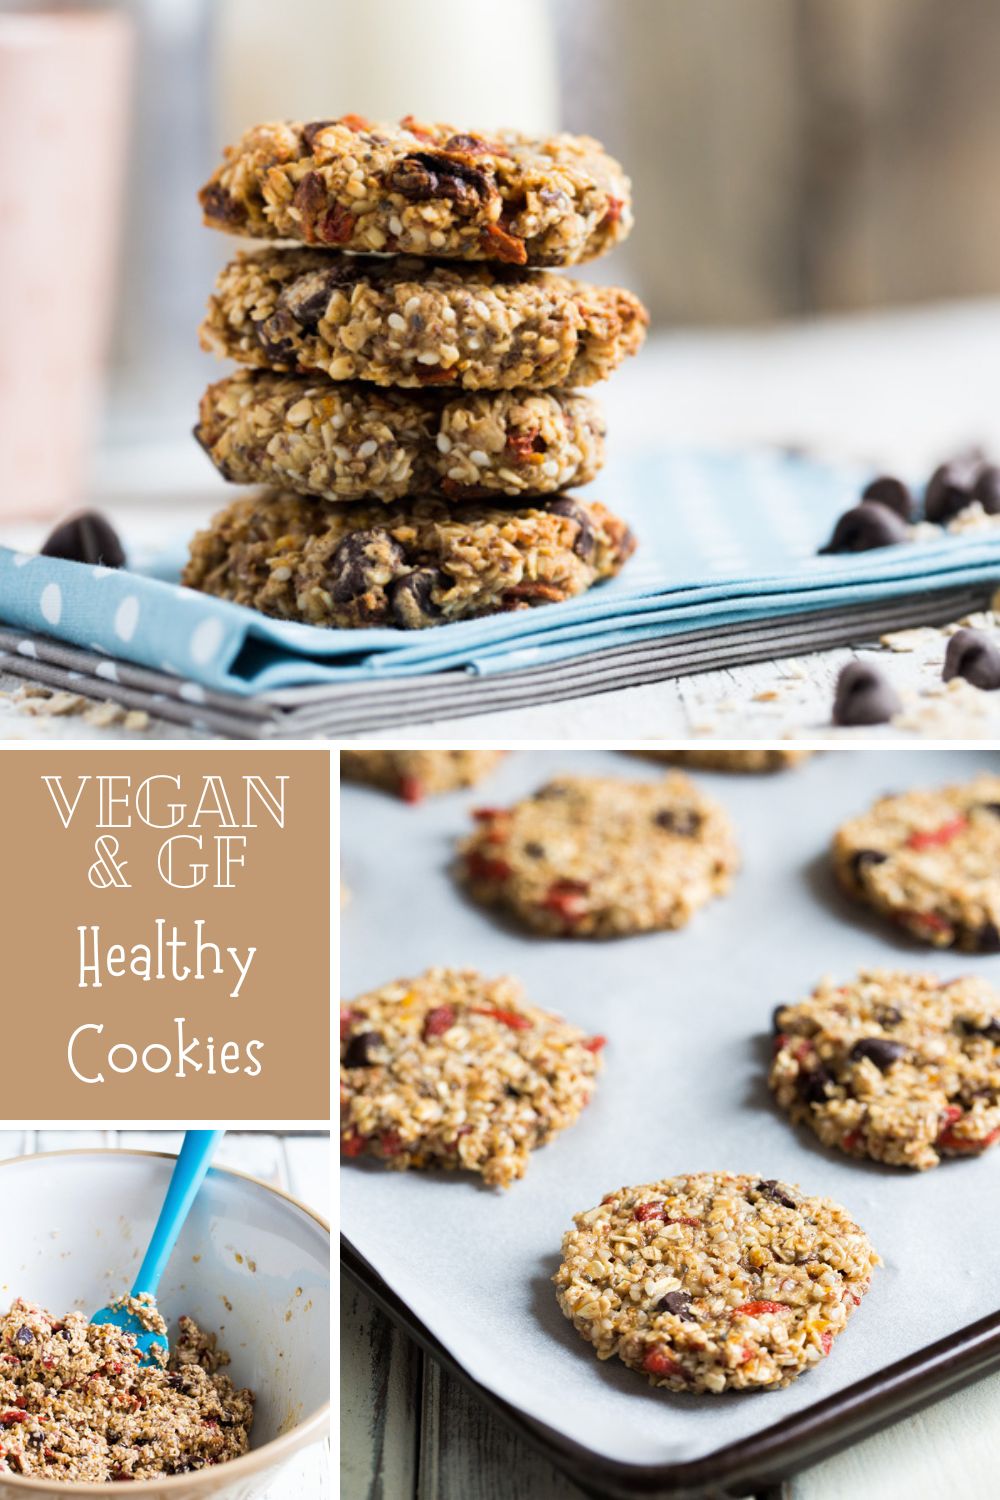 If you like oatmeal cookies, you're going to love this healthier version of a classic! They're chewy, naturally sweetened and packed with heart healthy seeds. Oh and they're deliciously moreish too! #oatmealcookies #glutenfreebaking #oatcookies #vegancookies #glutenfreecookies